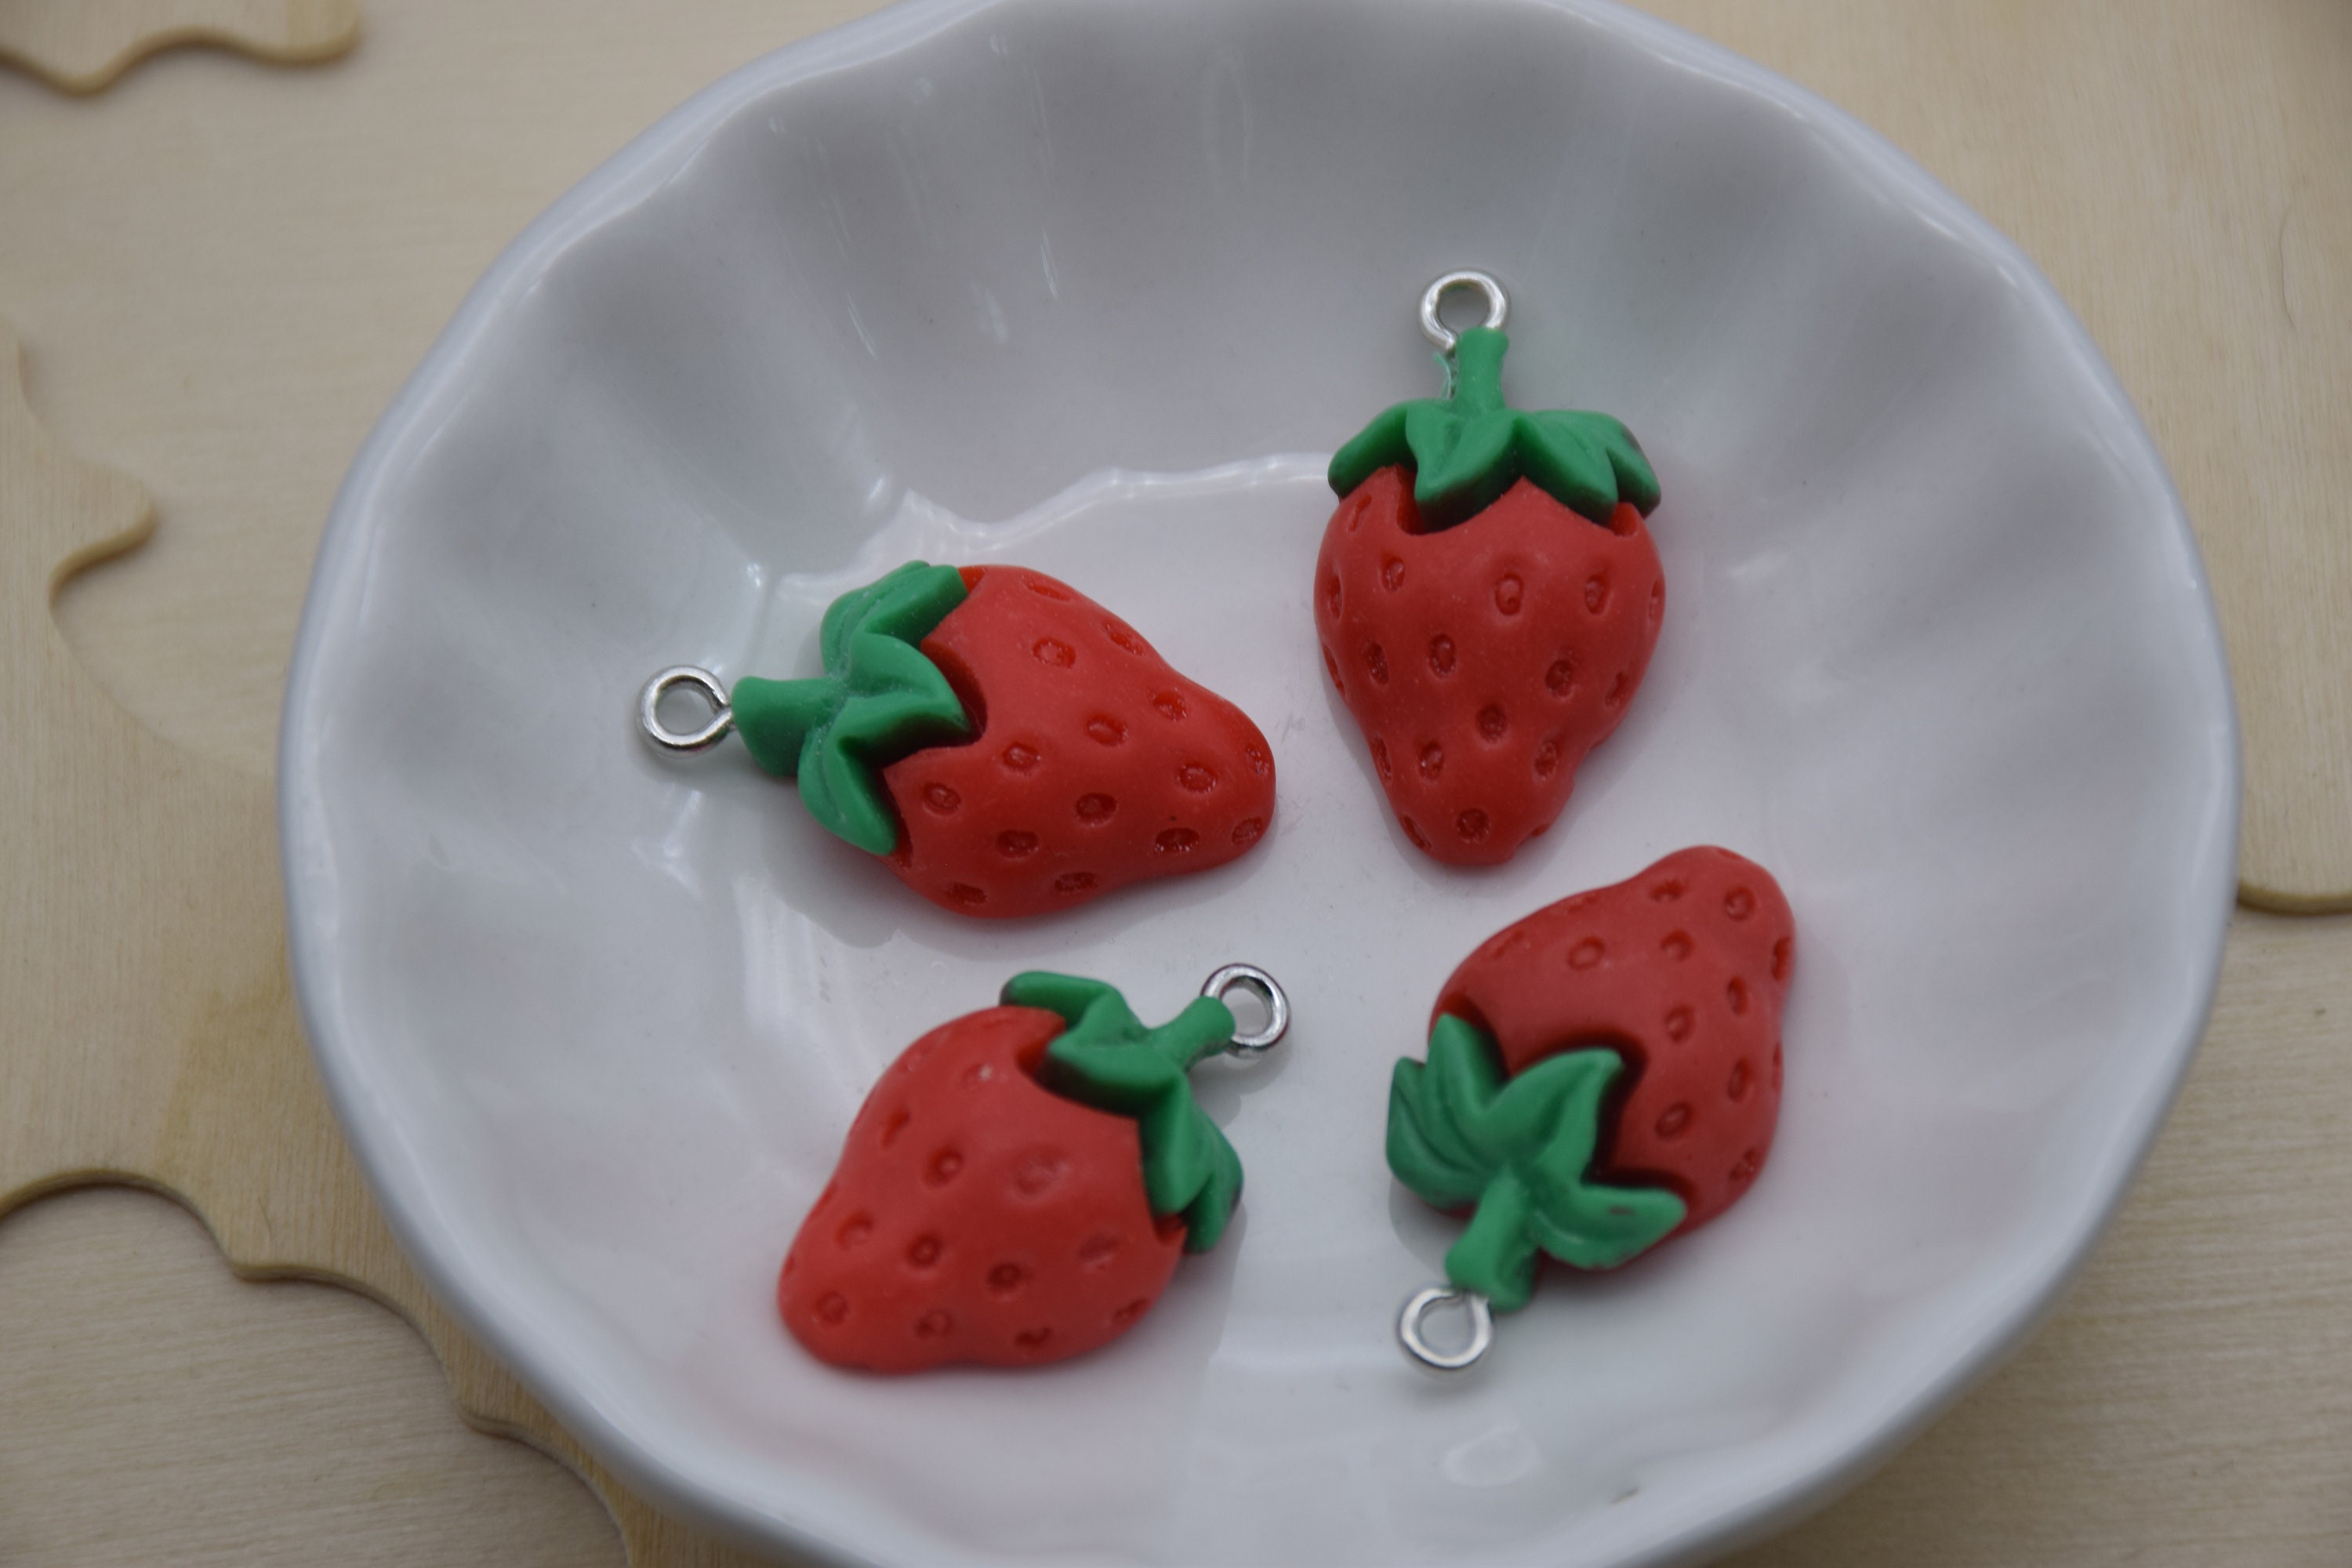 Handmade Strawberry Resin Strawberry Charm For DIY Jewelry Making Cute  Fruit Pendant Earrings And Fashion Accessories From Fuyu8, $0.51